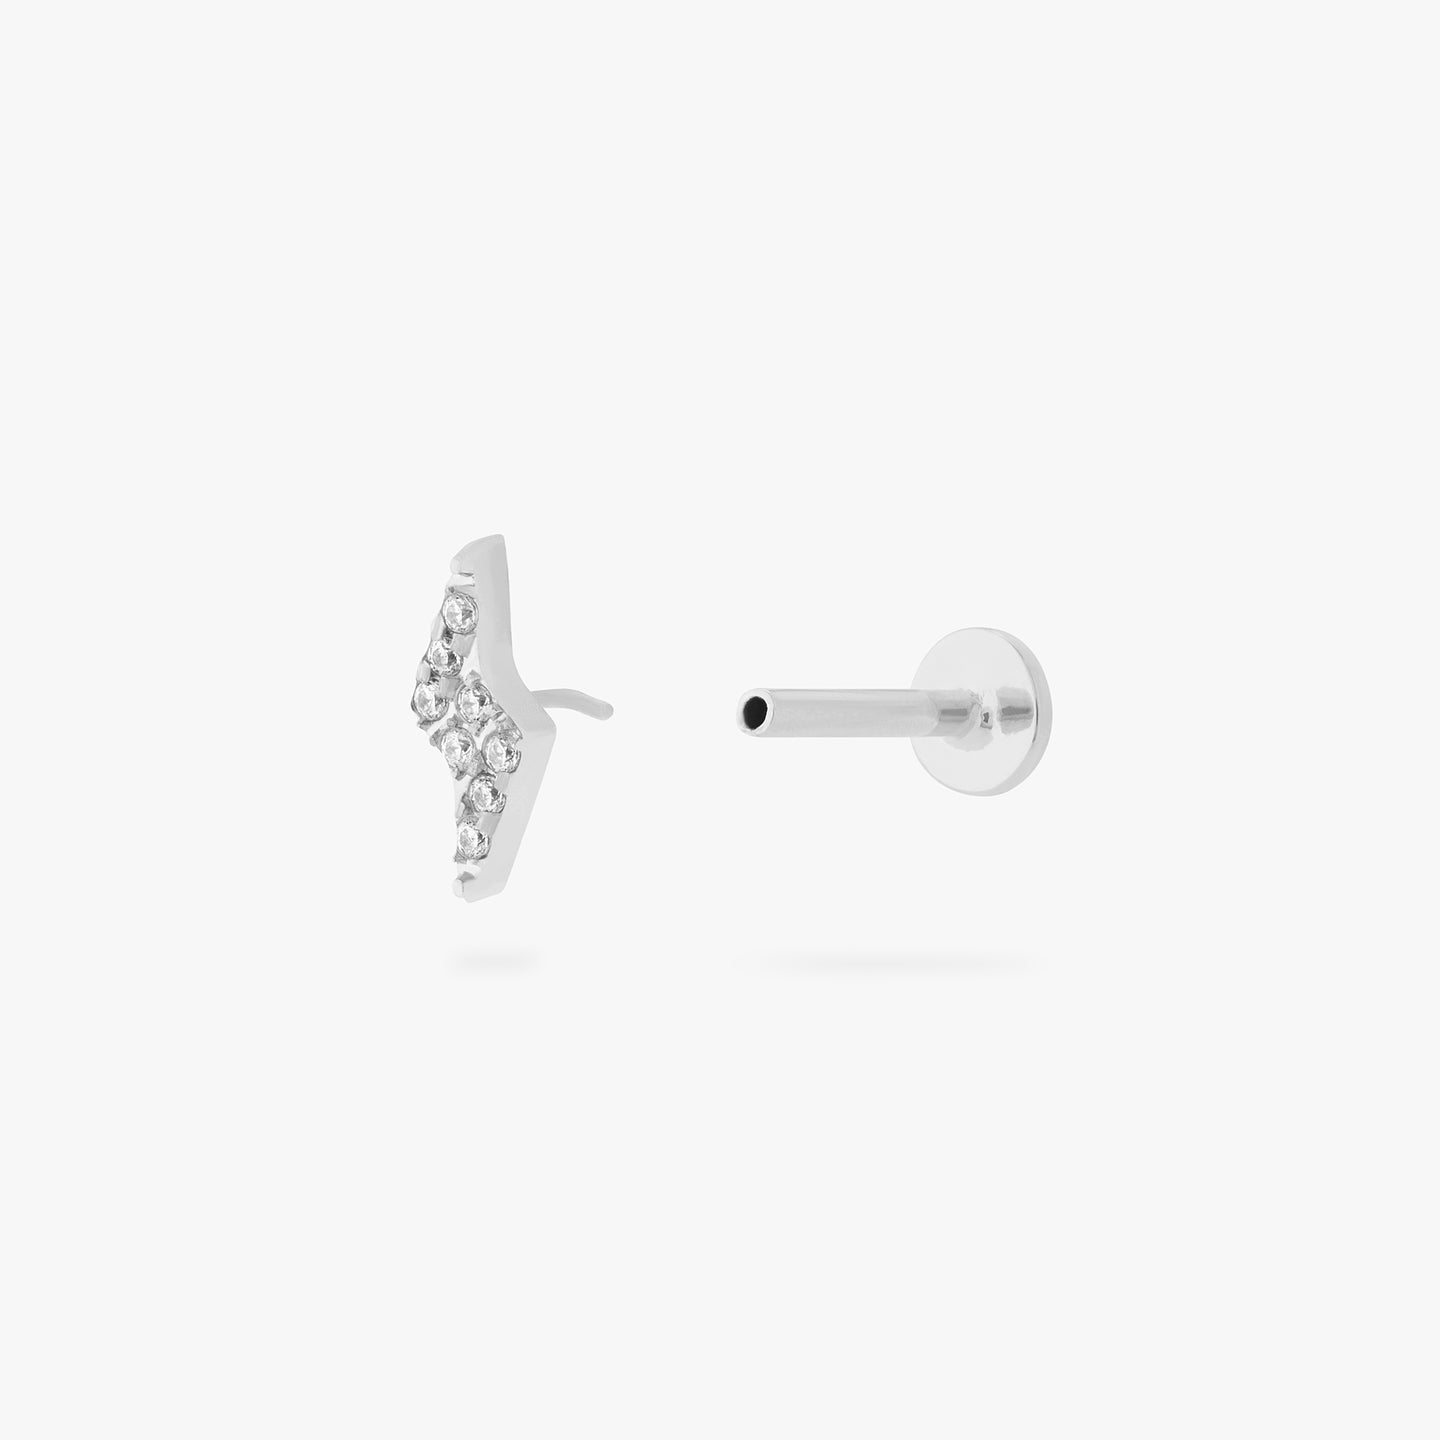 This is an image of a silver/clear pave lightning-bolt shaped flatback top with a silver labret with a circle disc that has an 